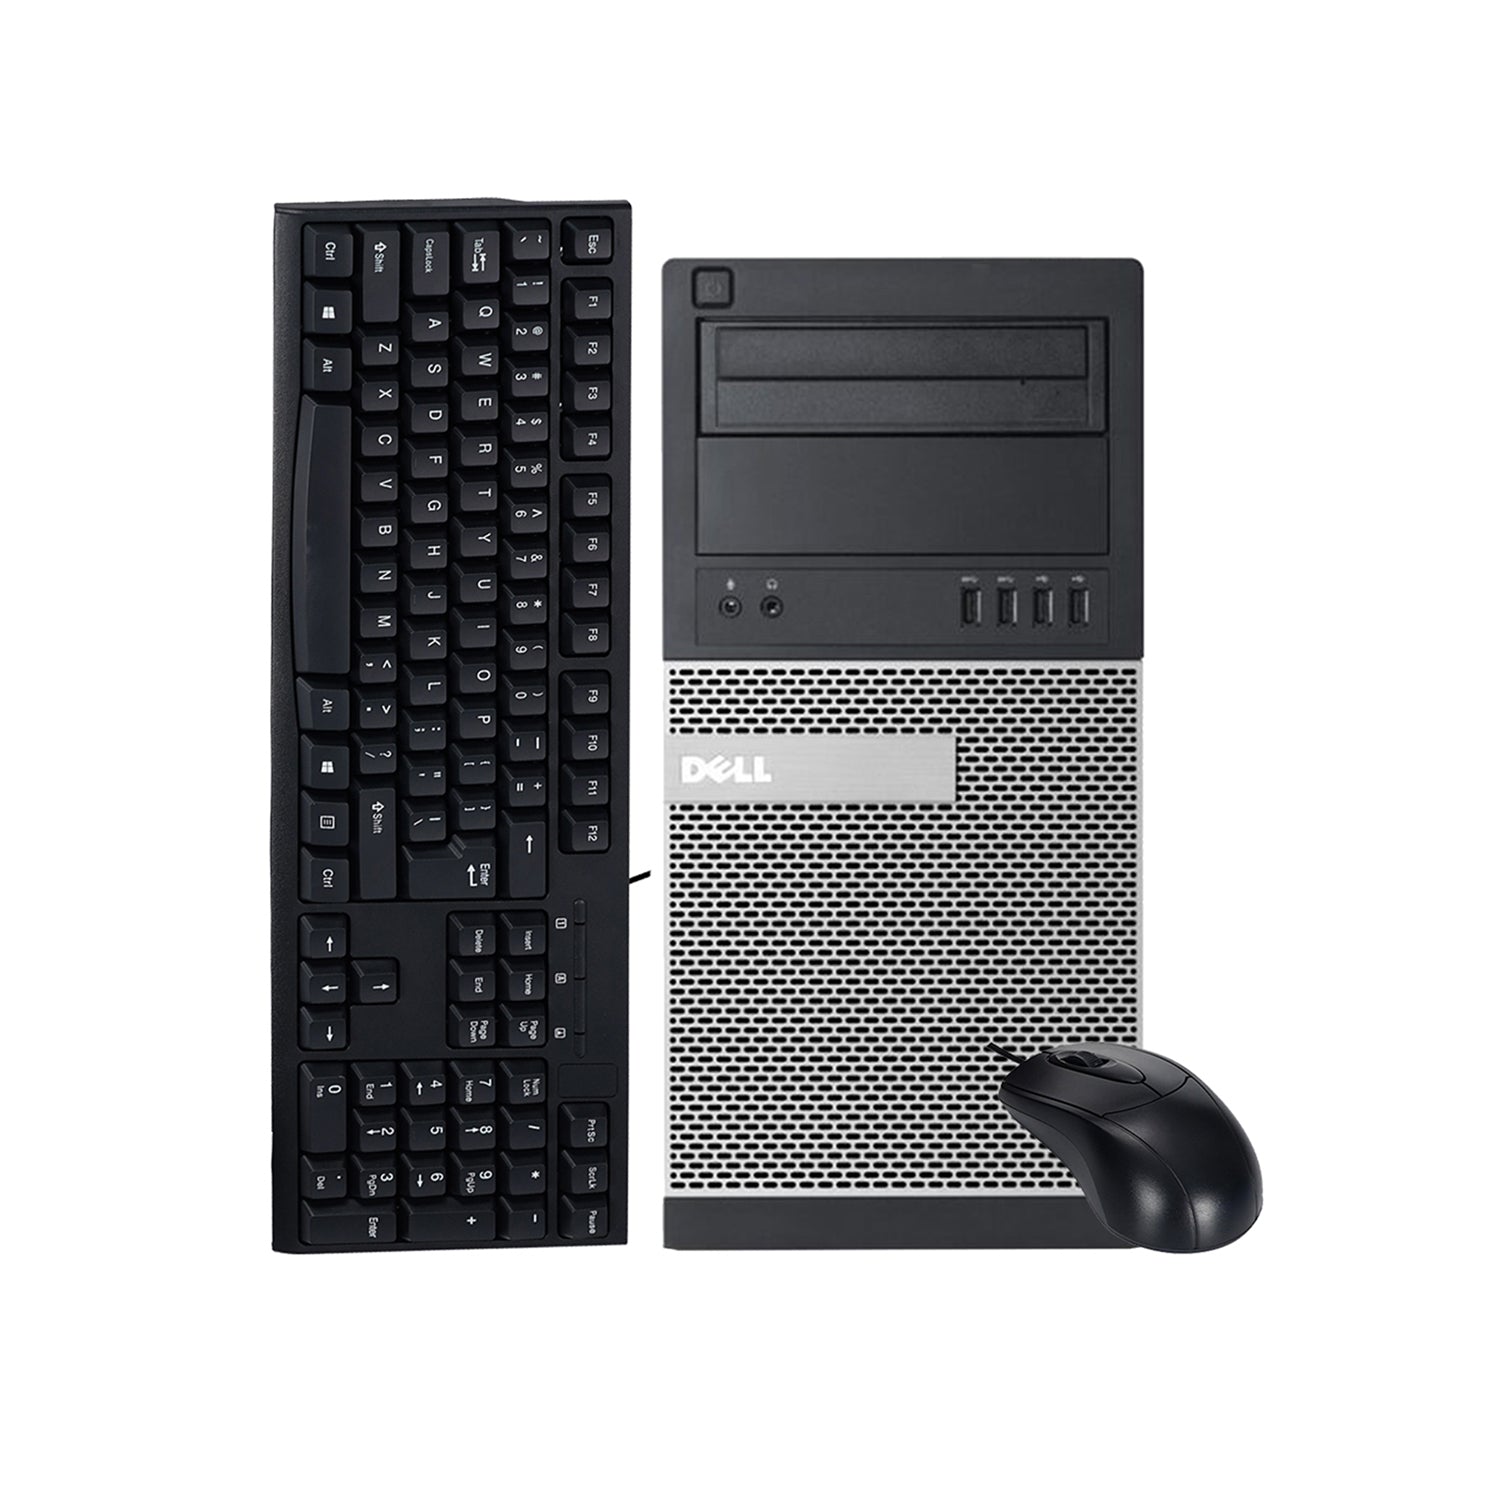 Dell OptiPlex 9020 Tower Business Desktop Computer PC | Intel Core i5 up to 3.60 GHz | 8GB - 32GB RAM | 256GB - 1TB SSD | Windows 10 Pro | Wired Keyboard and Mouse | WIFI - Refurbished